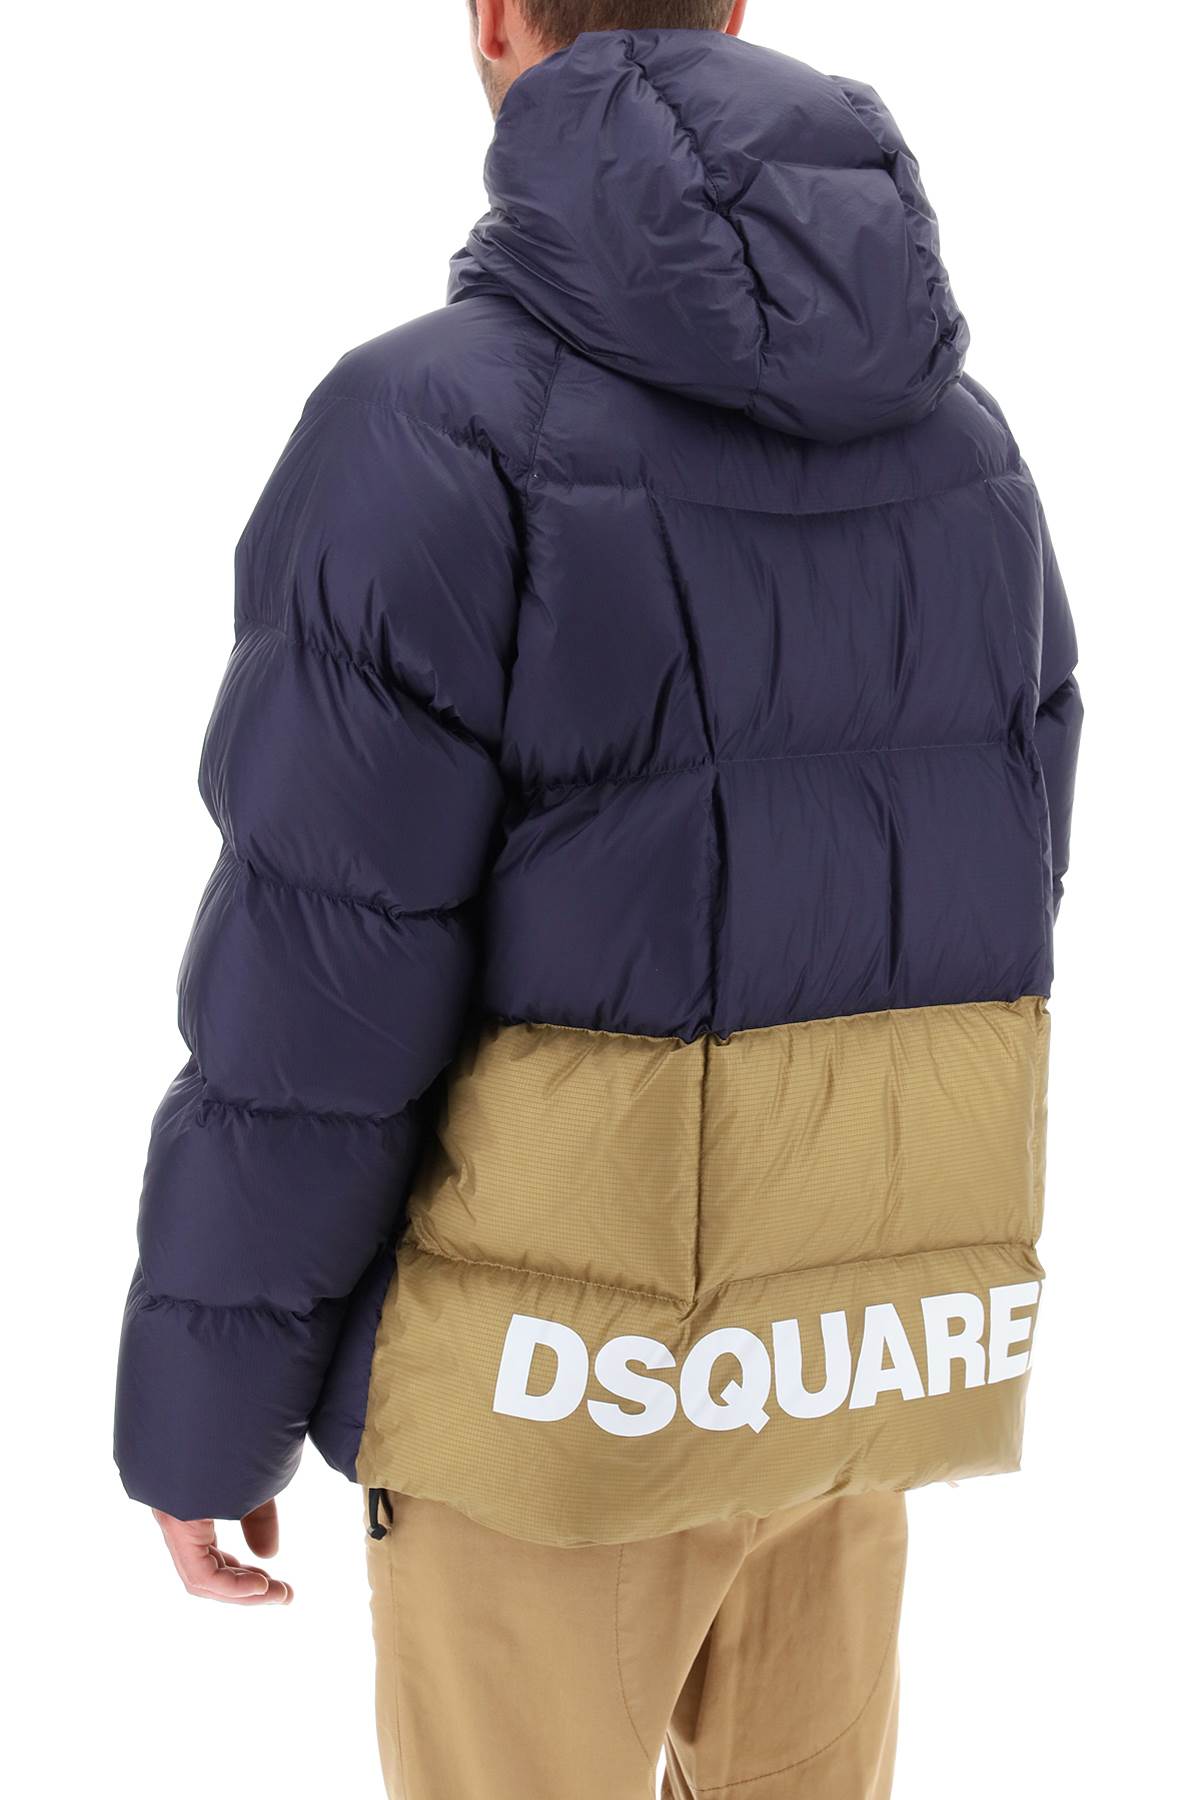 Dsquared2 logo print hooded down jacket-2